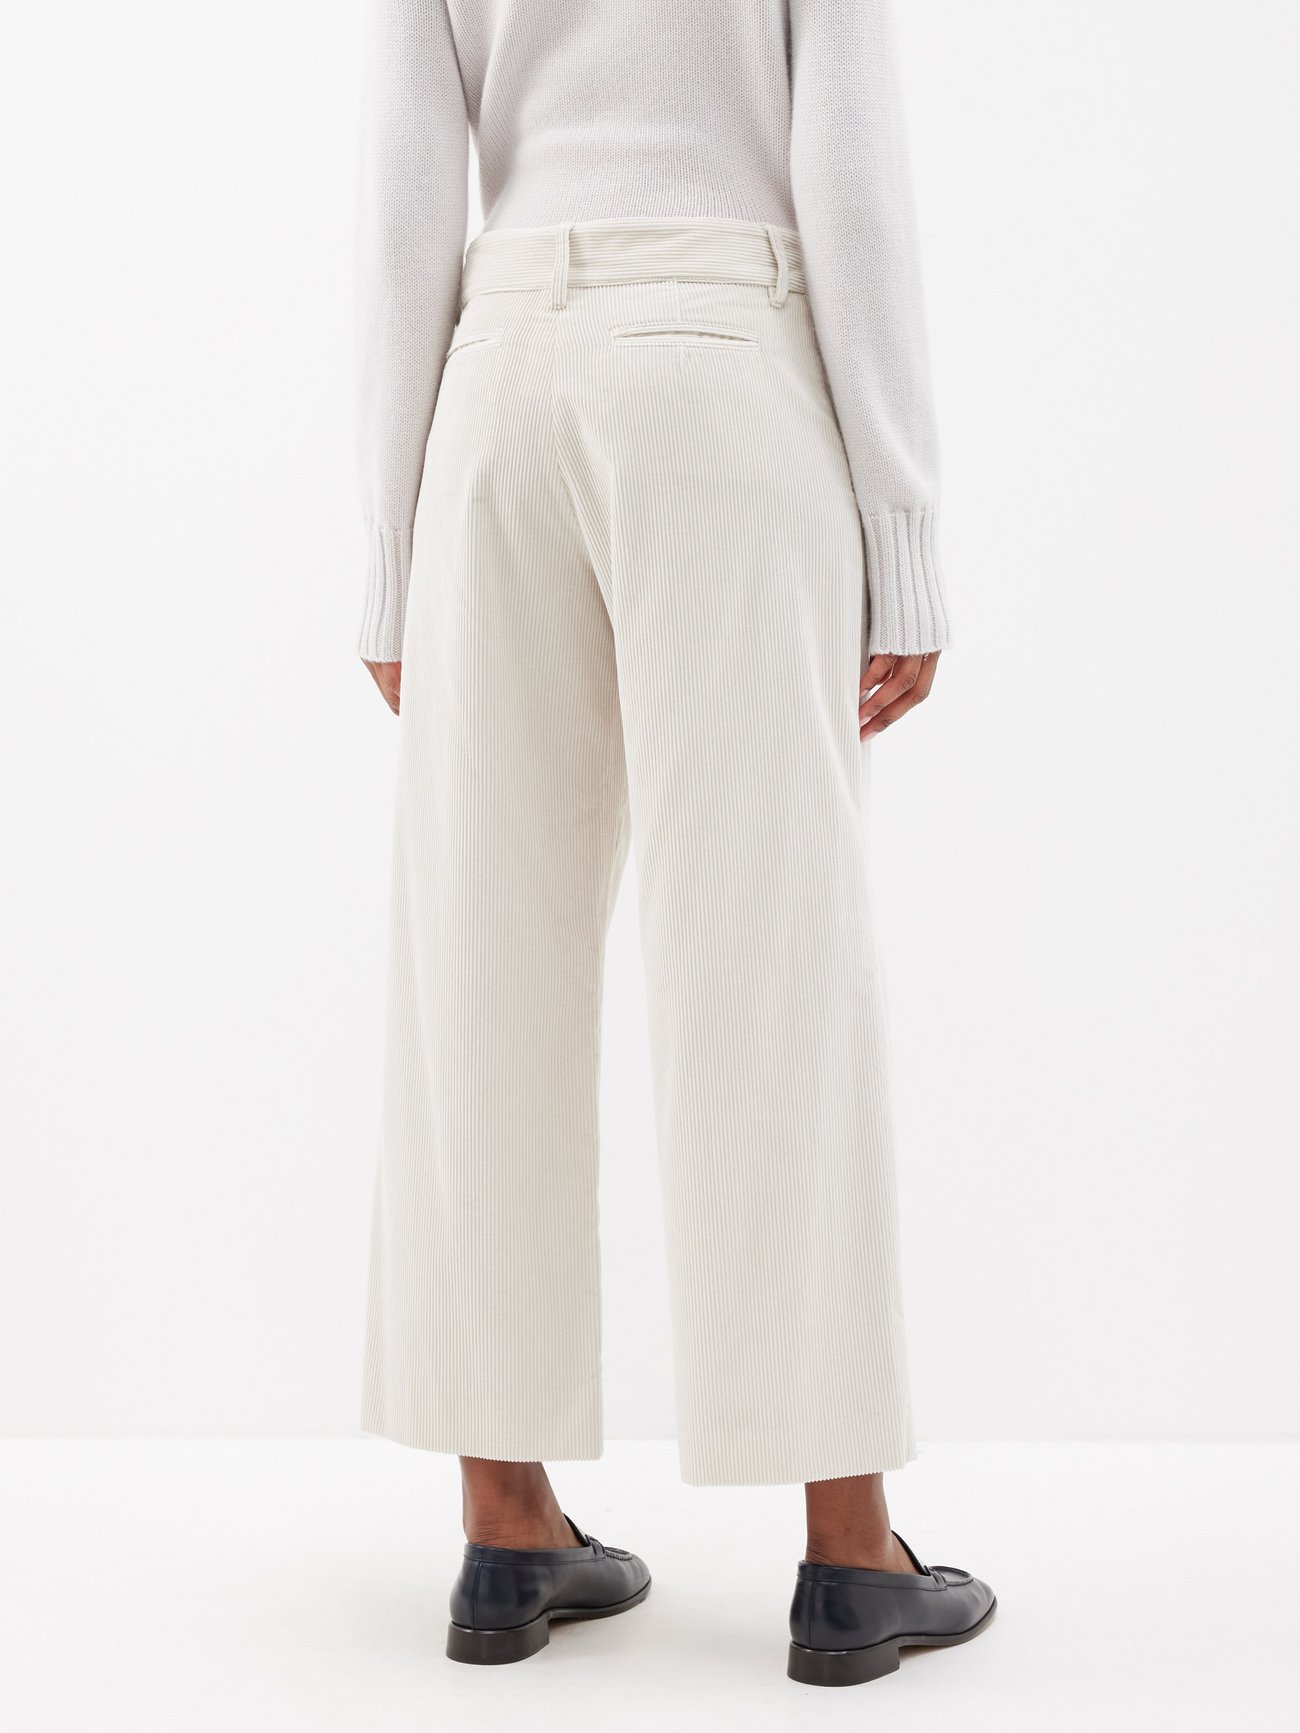 S Max Mara Helier trousers